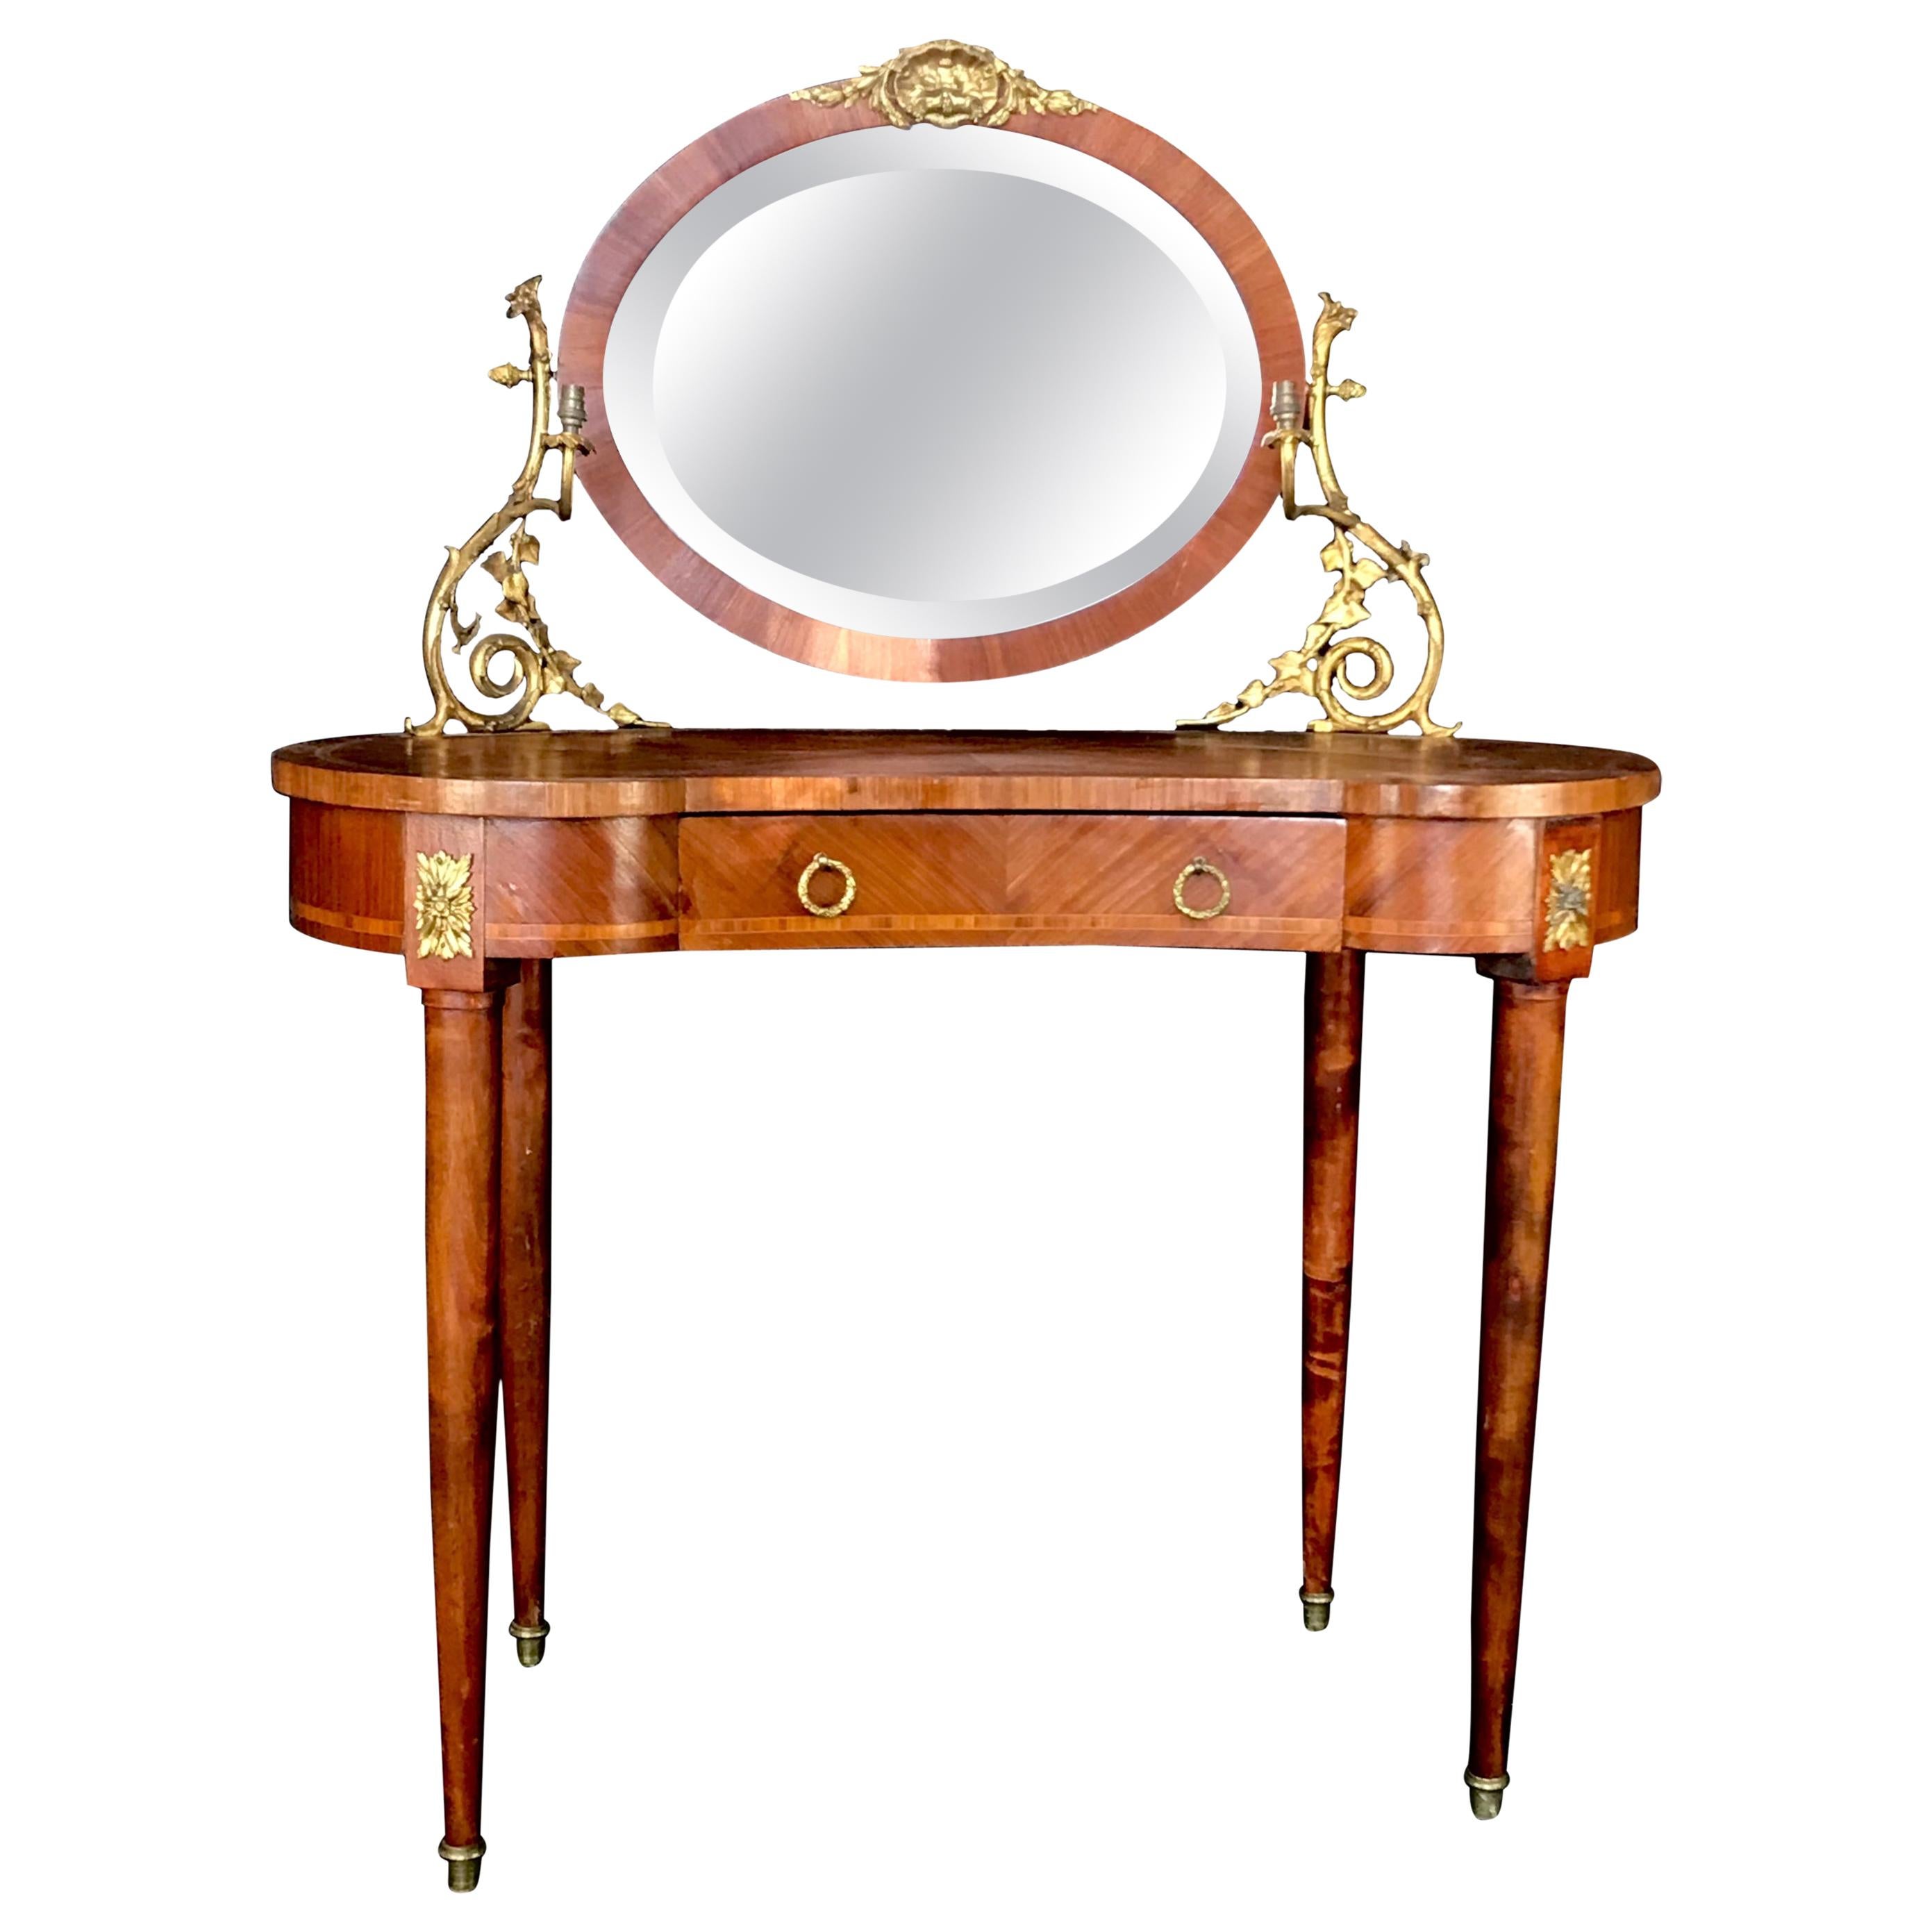 Romantic French Inlaid Walnut and Bronze Dressing Table with Candelabra Arms